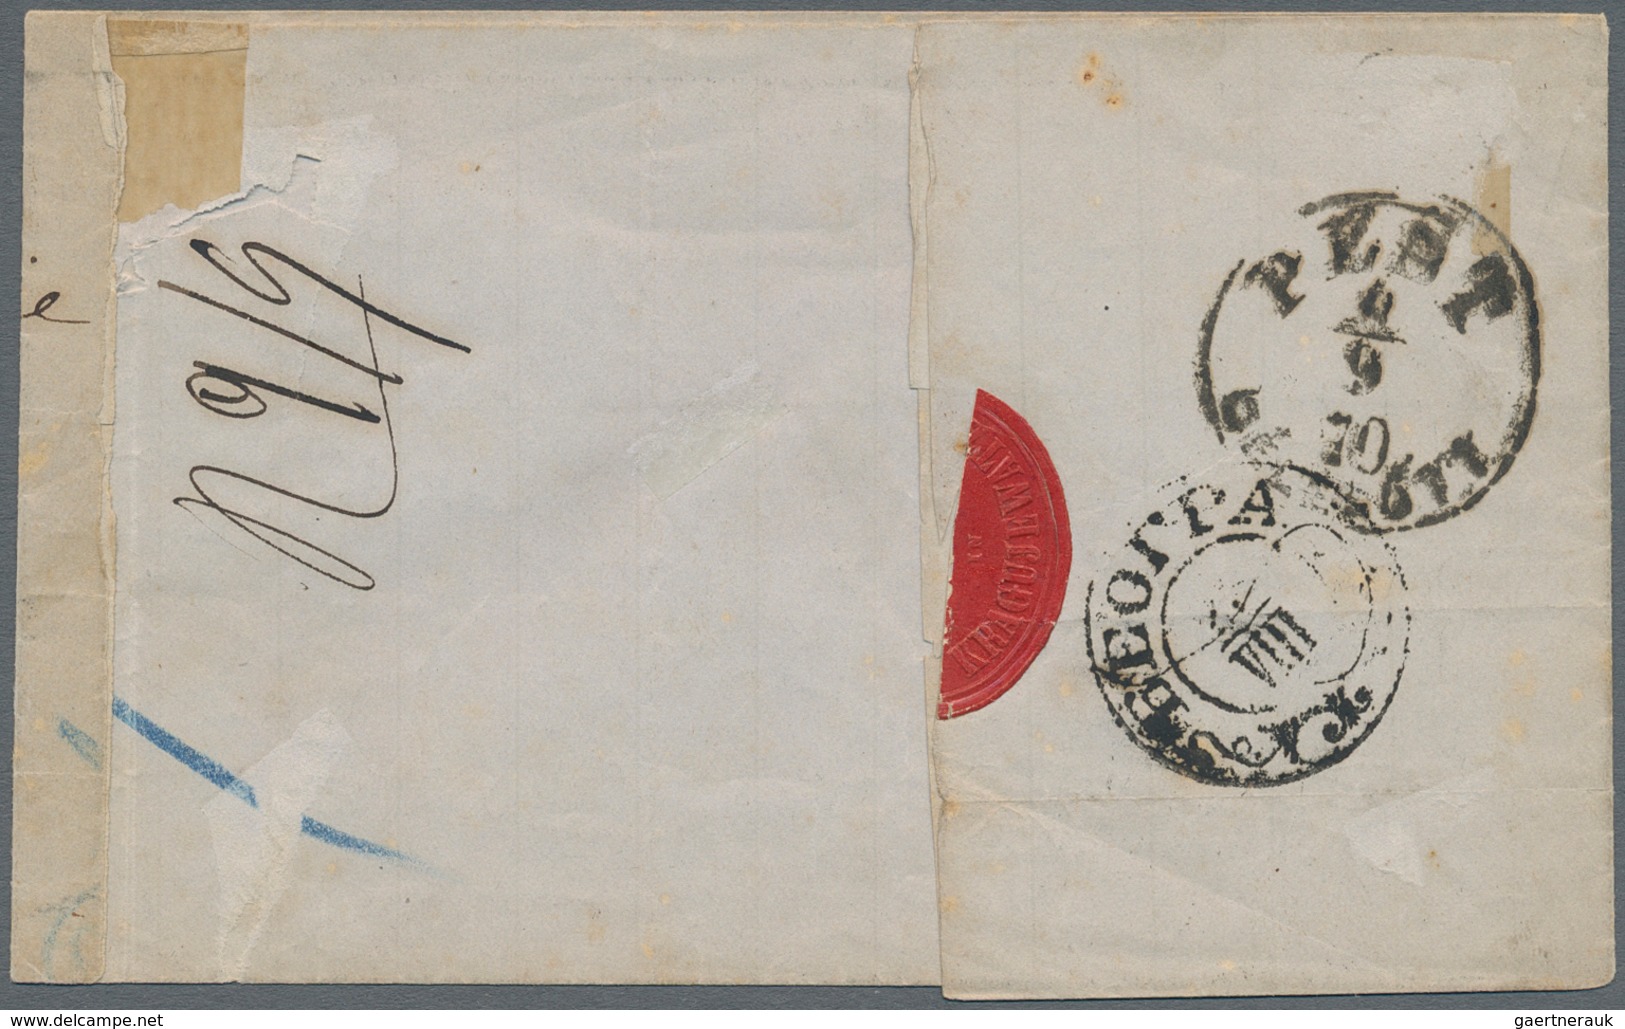 Serbien: 1870. Cover (small Faults) To Hungary Correctly Franked With 25 P Carmine-rose, Perf L 9 1/ - Serbia